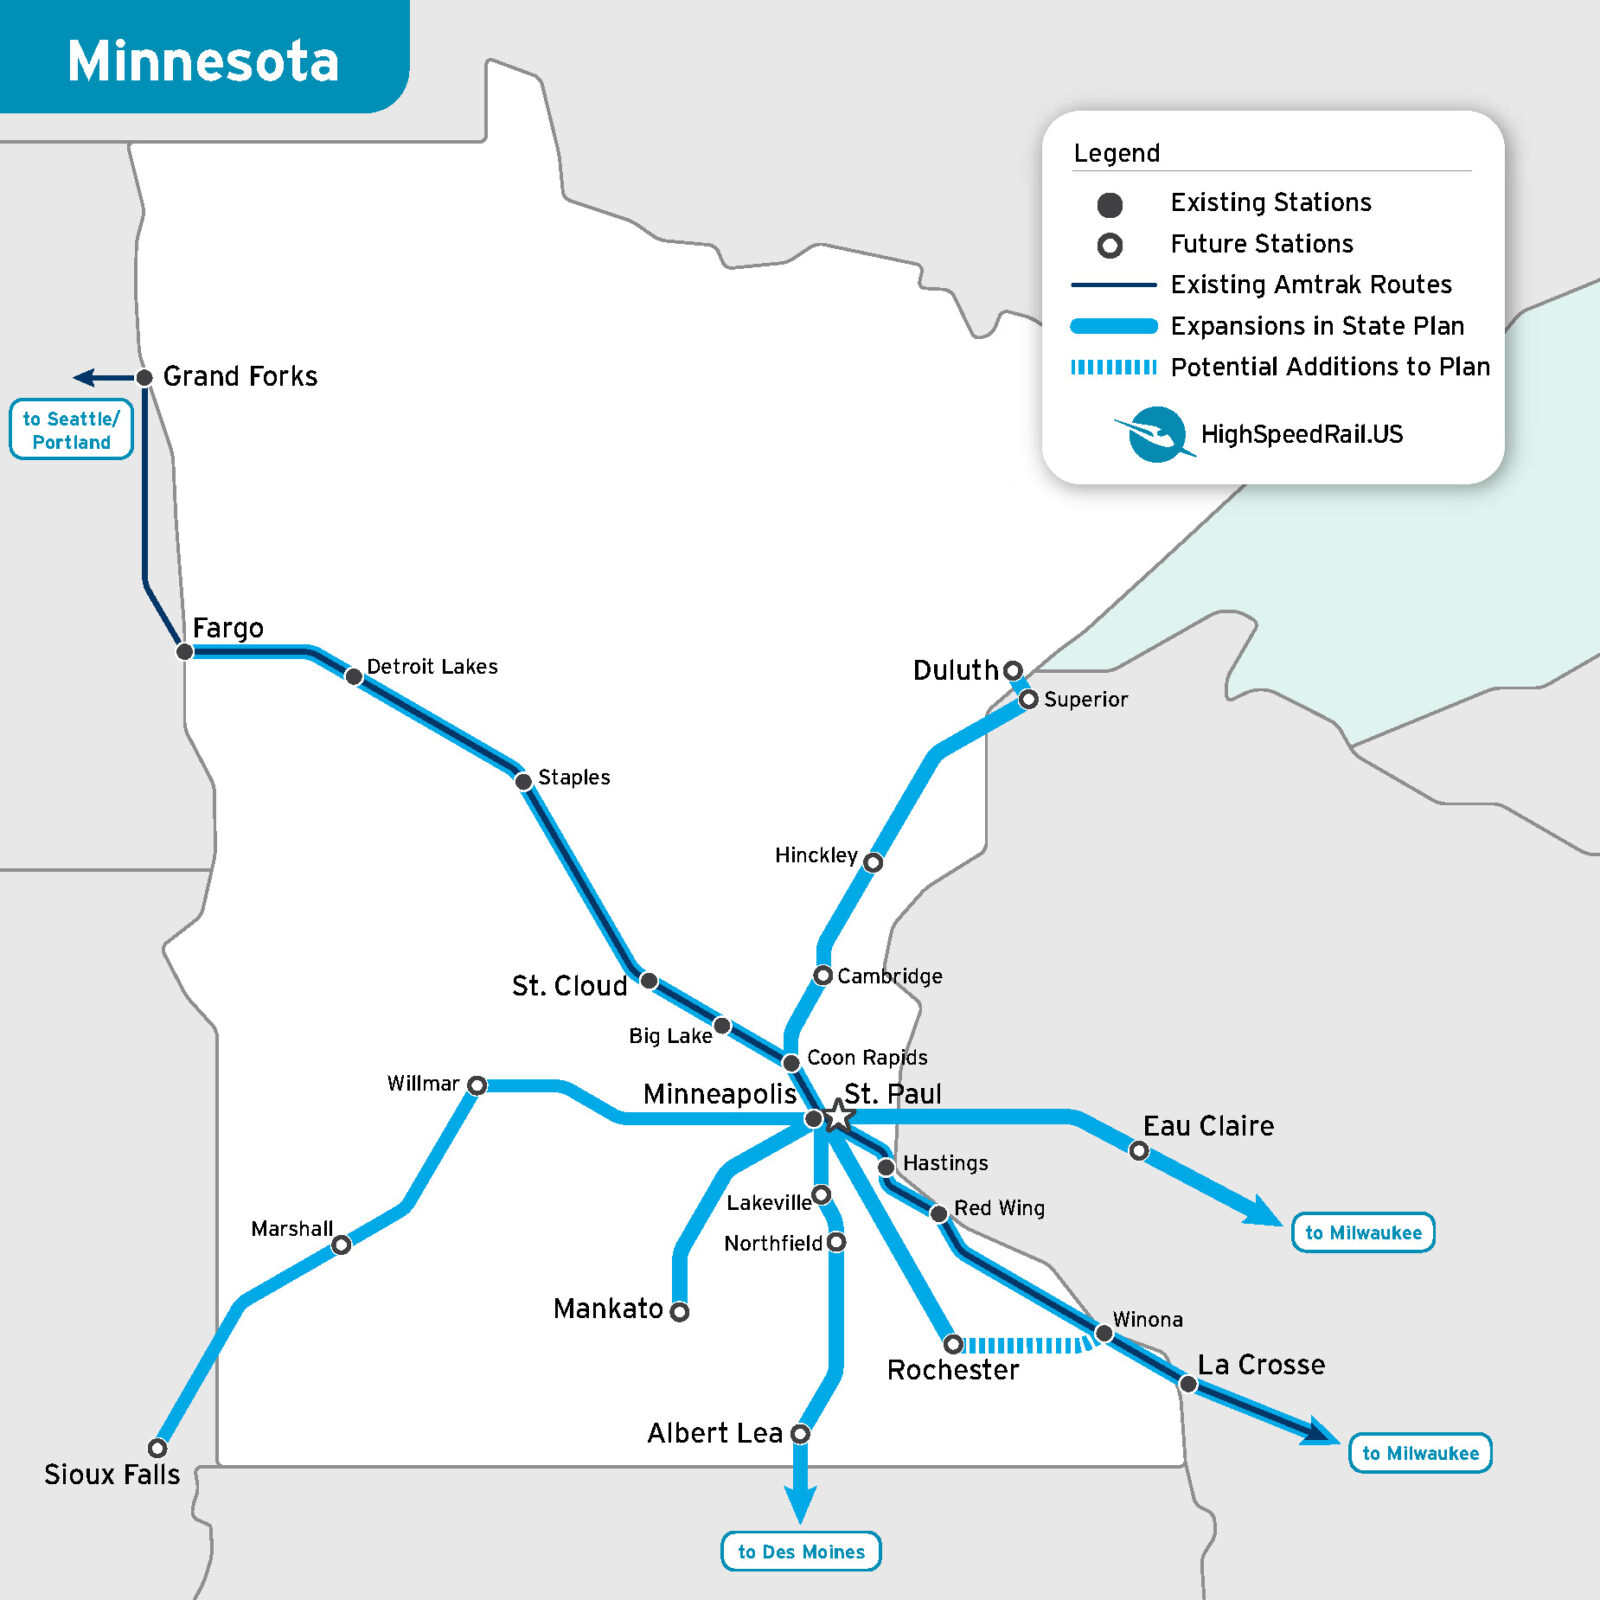 Map of potential passenger rail routes hubbed around Minneapolis - St. Paul.